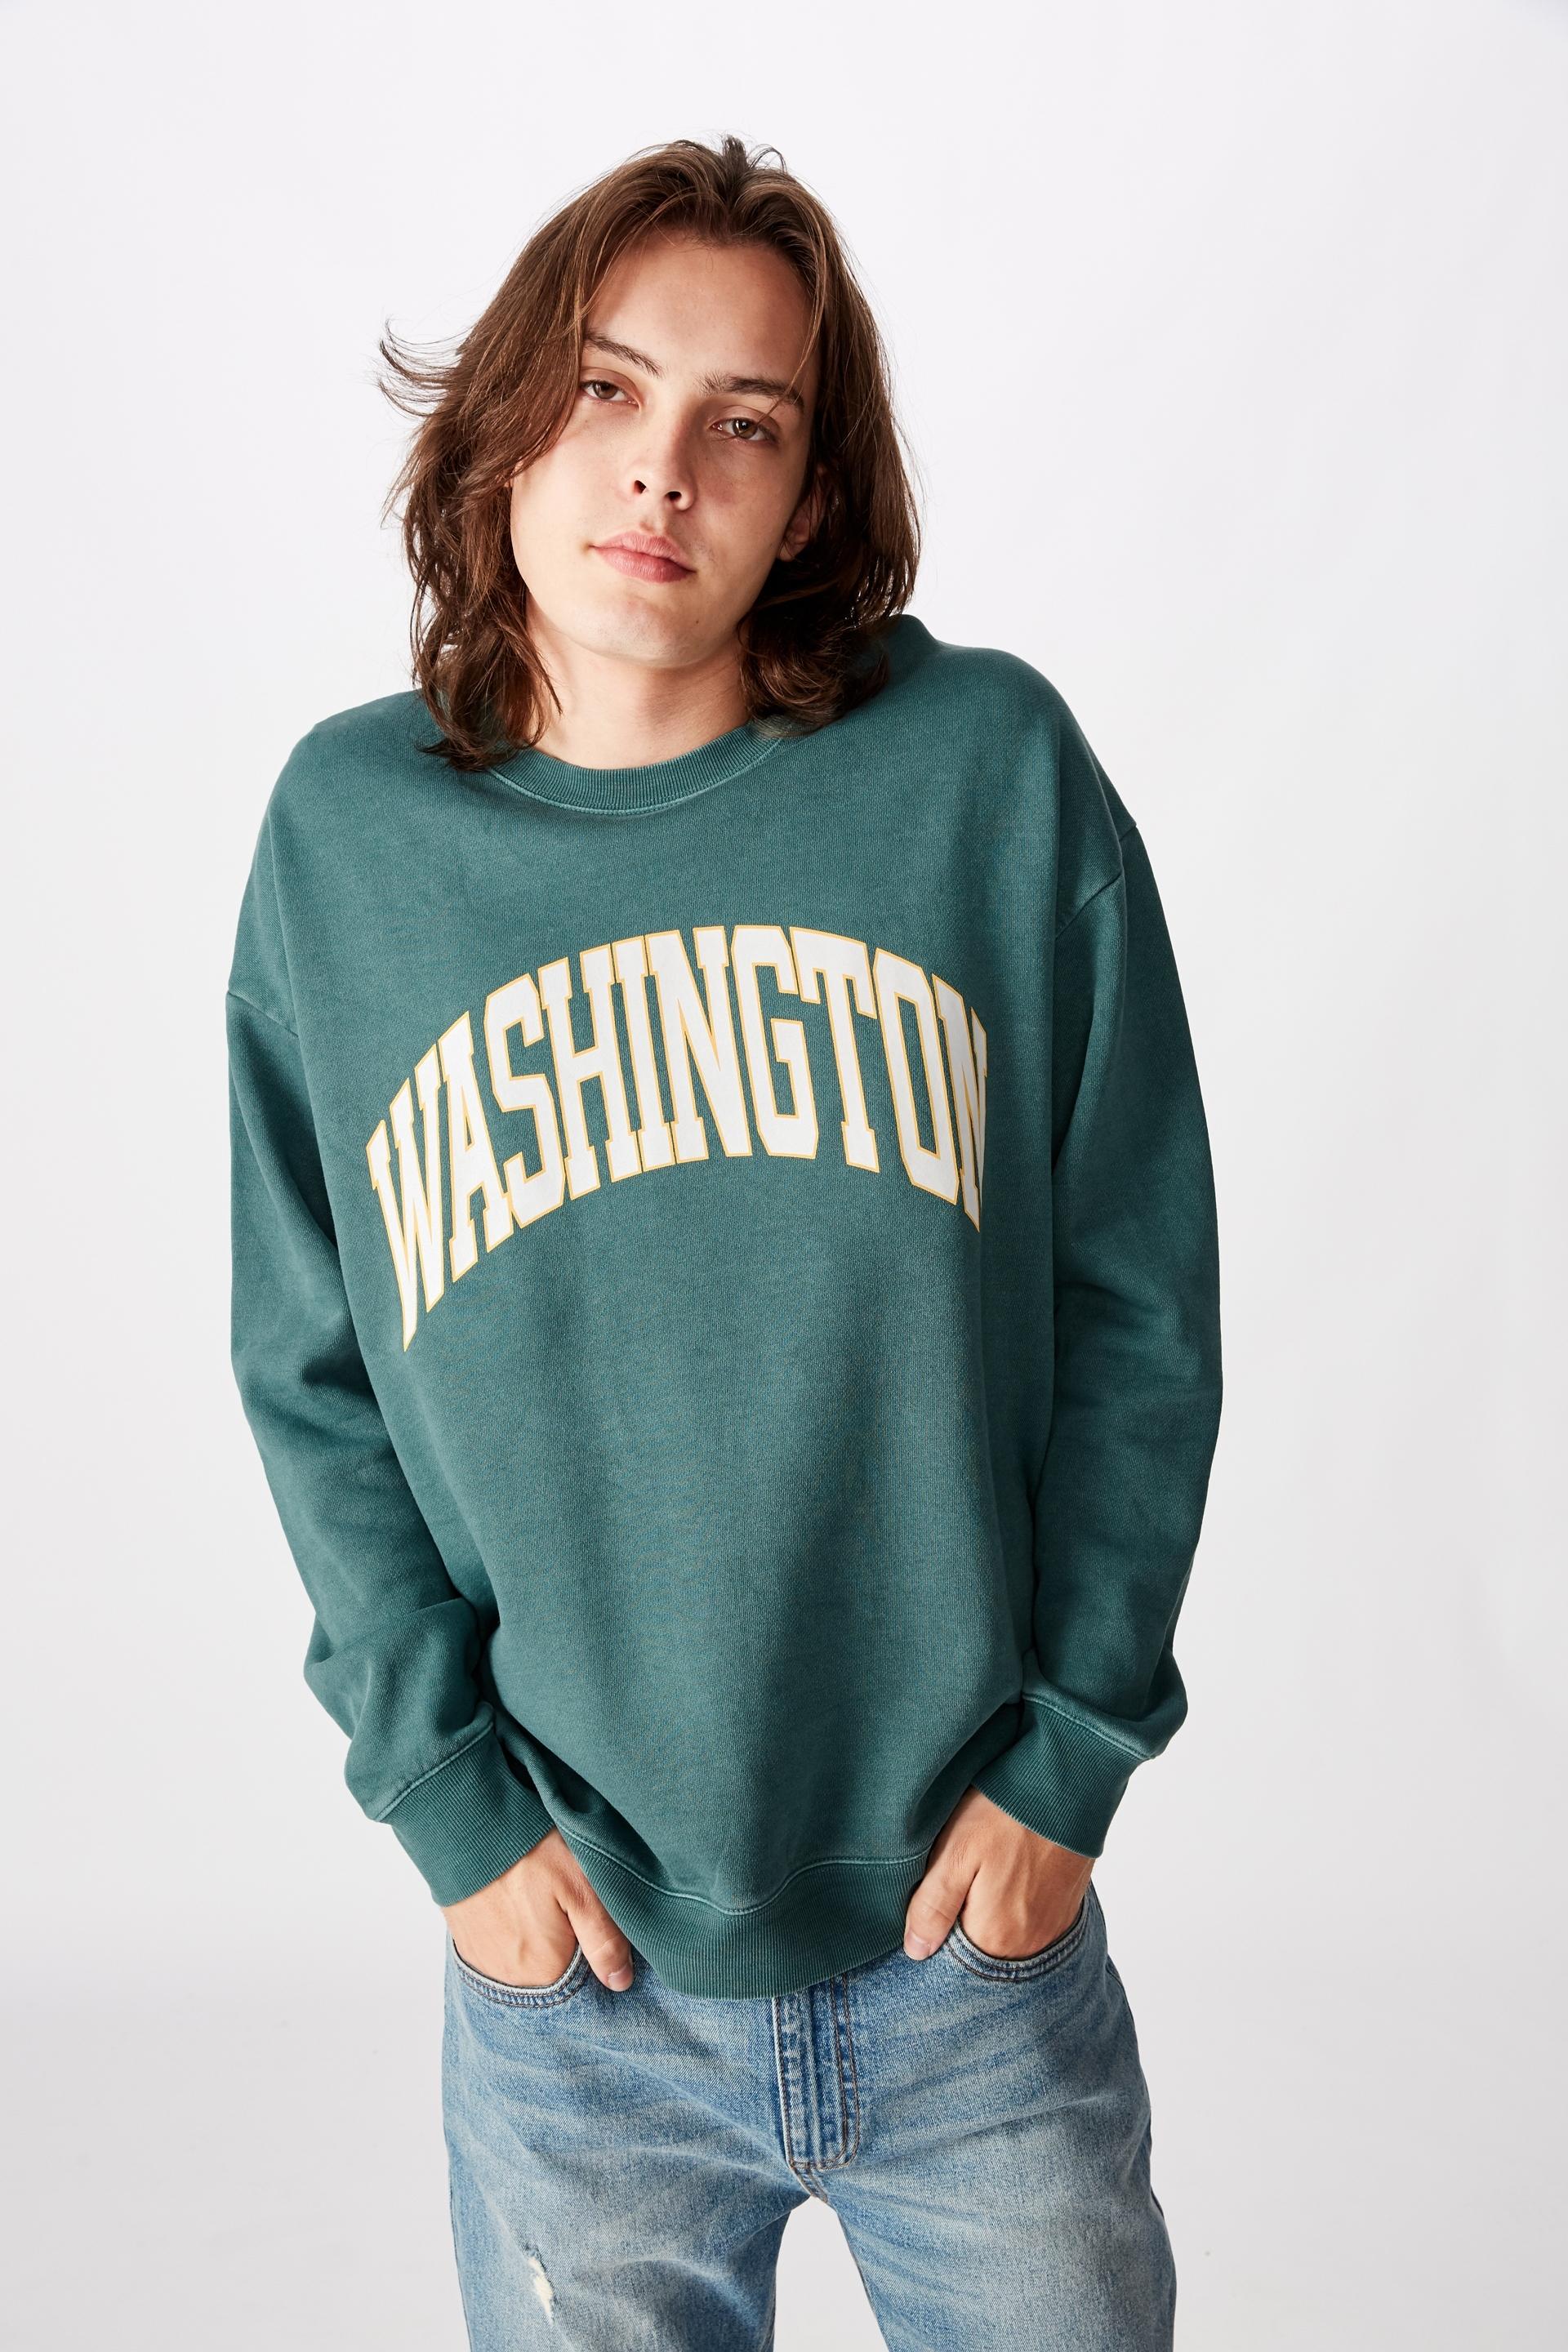 Washington oversized graphic crew - washed forest green Factorie Hoodies & Sweats | Superbalist.com